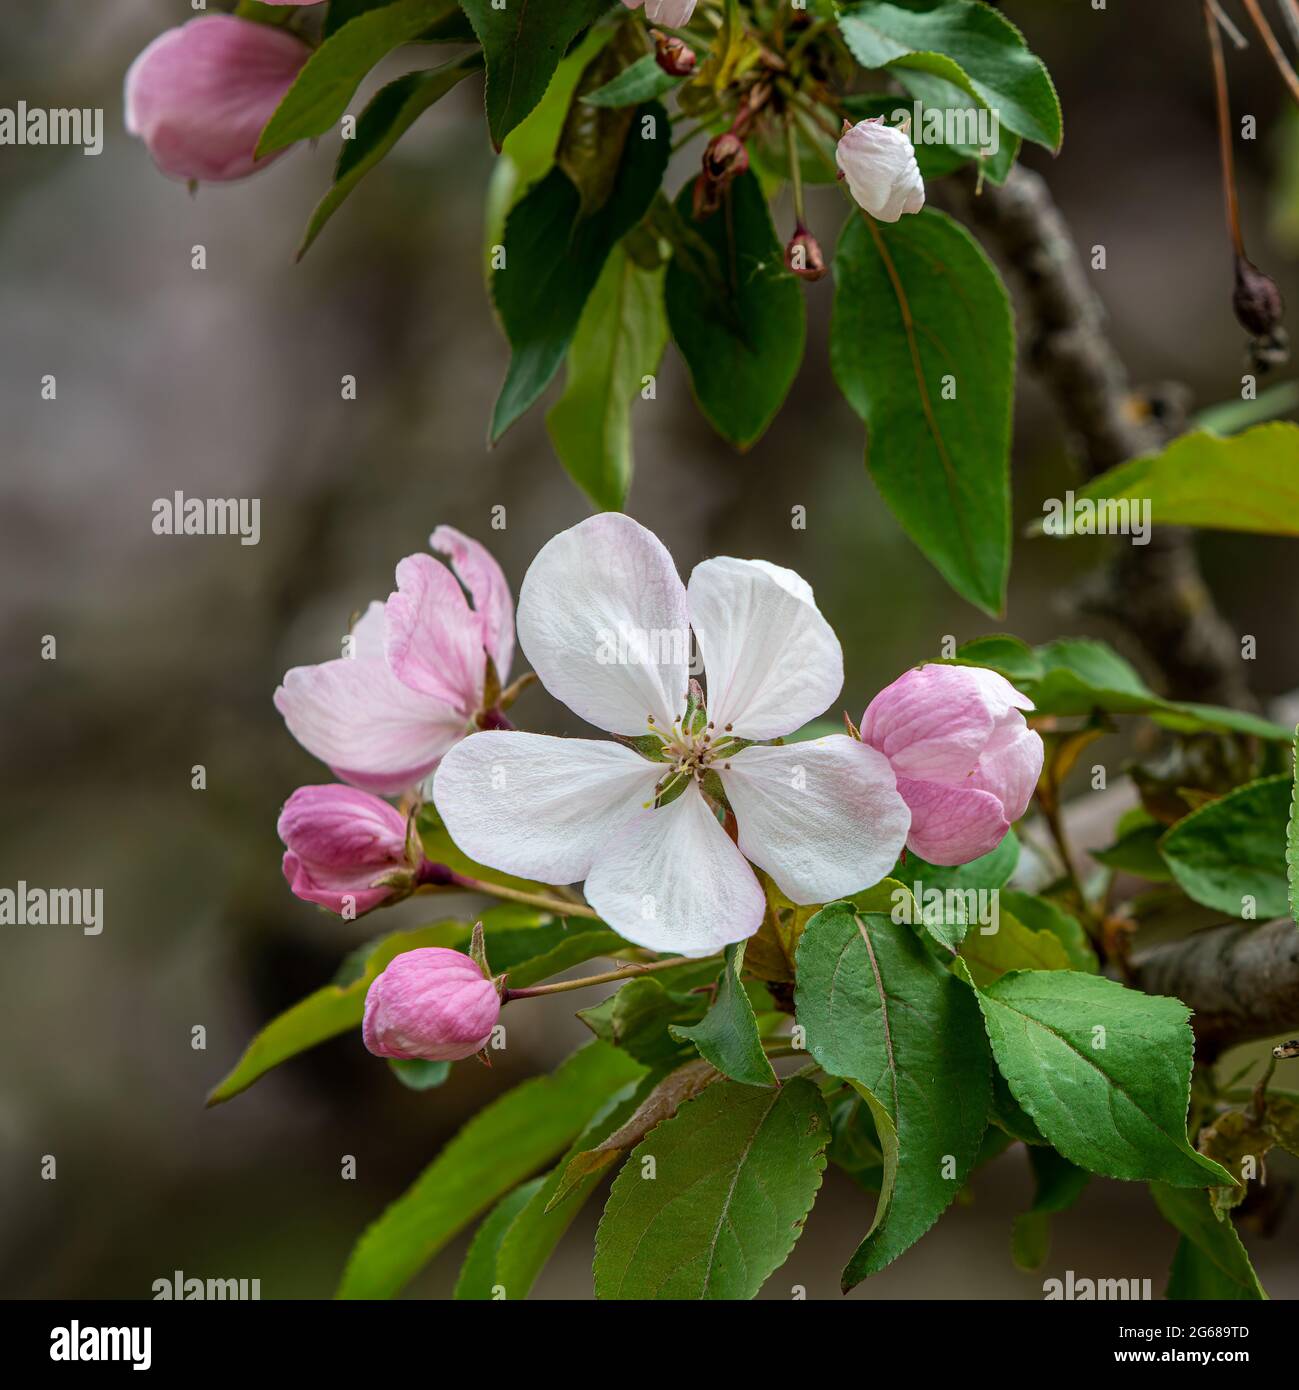 Spring blossoms on an apple tree in the English Gardens, Assiniboine Park, Winnipeg, Manitoba, Canada. Stock Photo